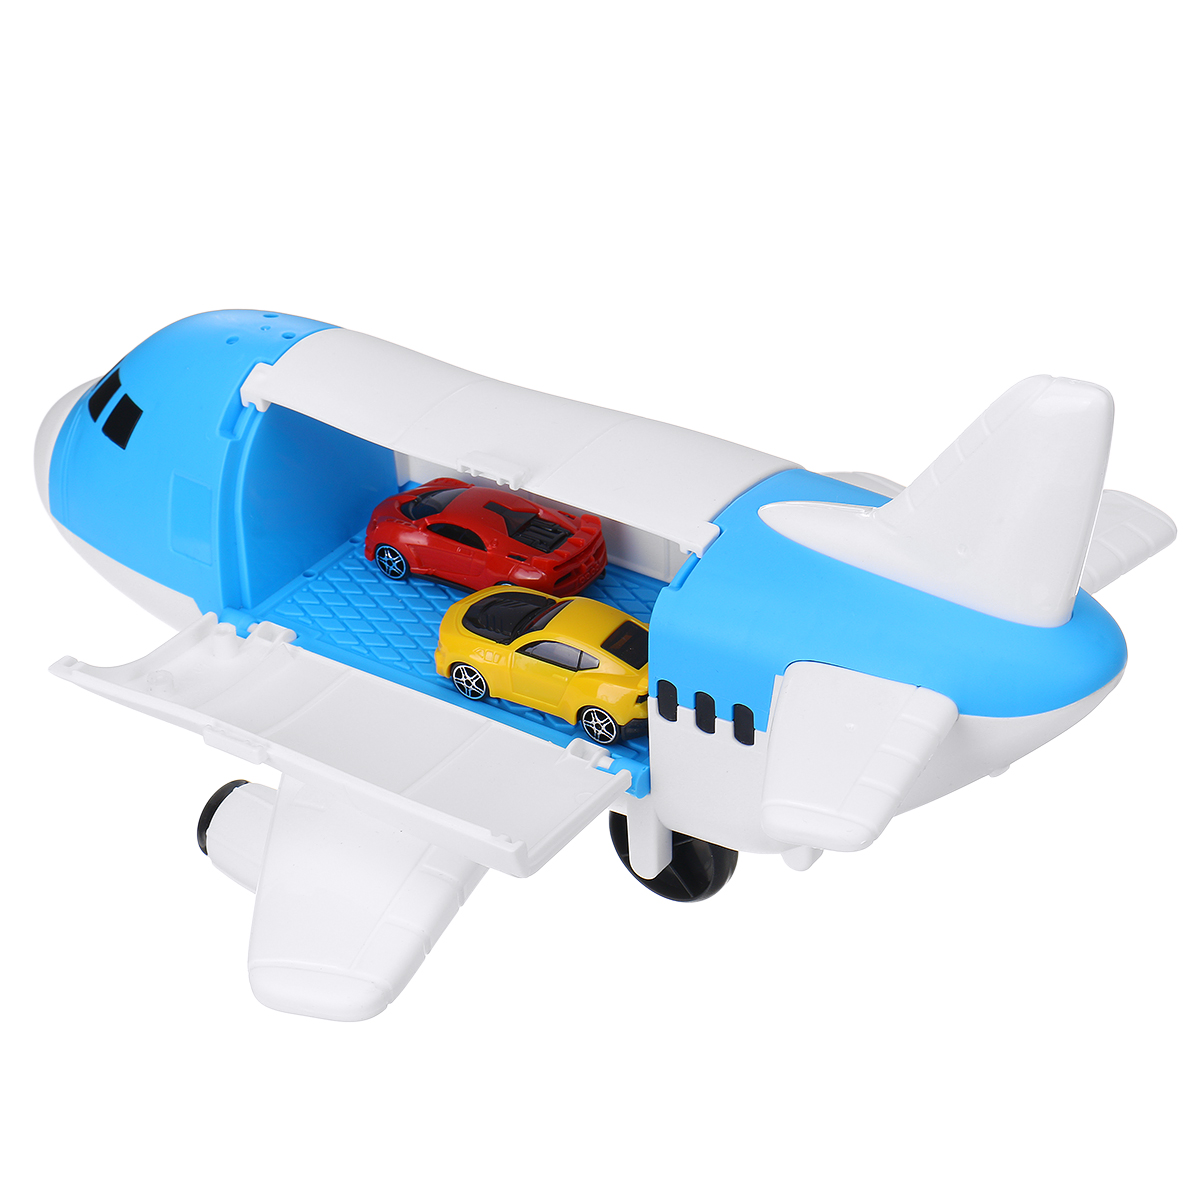 Storage-Transport-Aircraft-Model-Inertia-Diecast-Model-Car-Set-Toy-for-Childrens-Gift-1621631-2